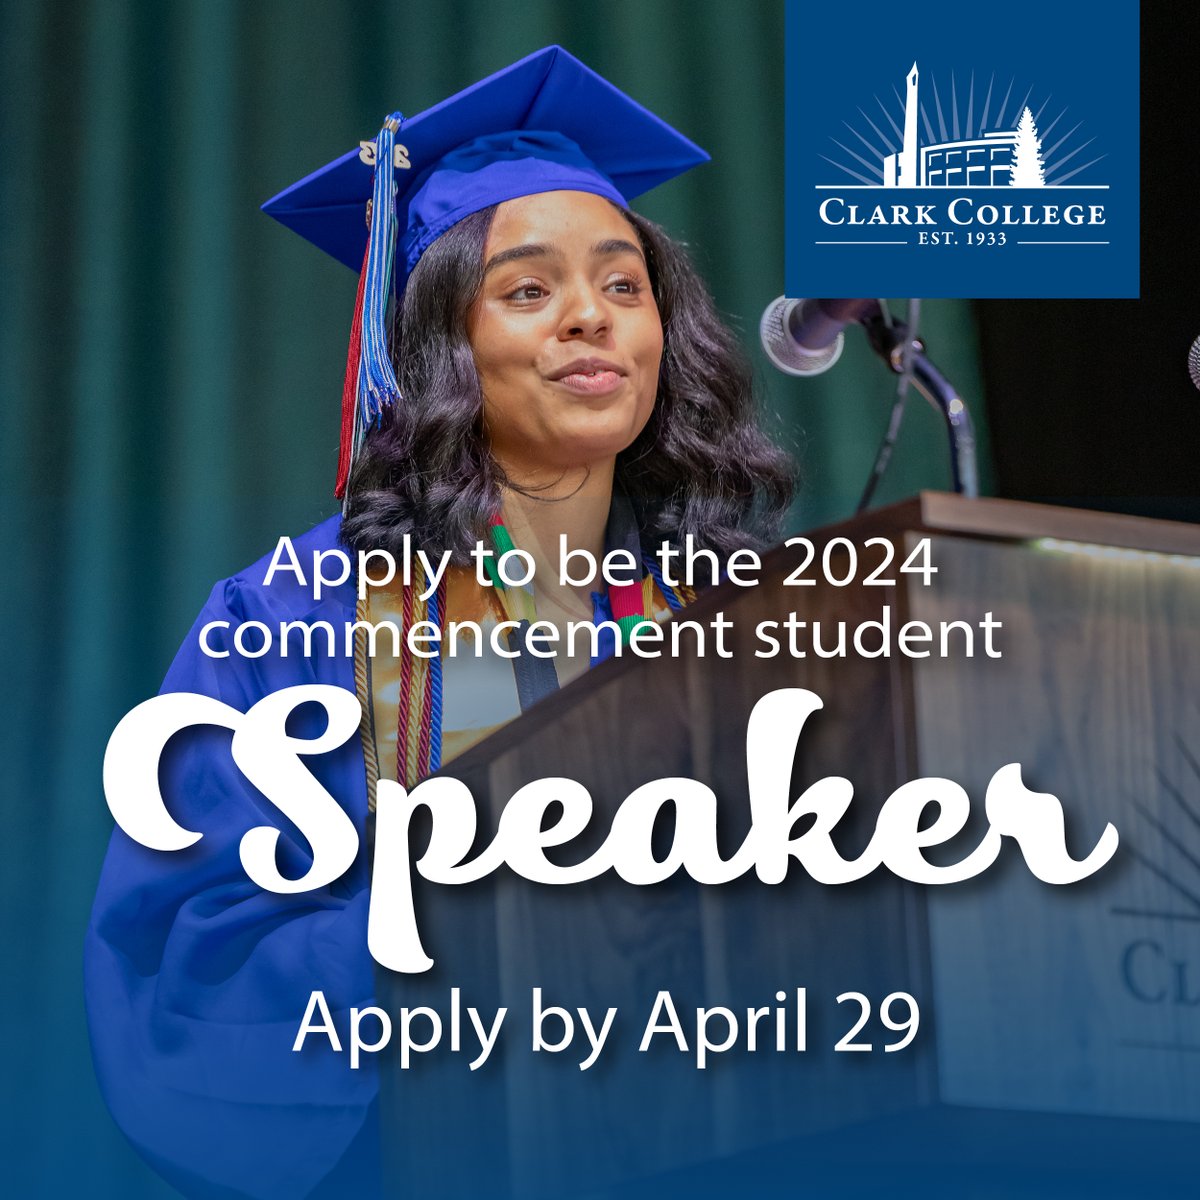 Have something to say? Apply to be the 2024 student speaker at your commencement ceremony. Applications are due April 29th, including a first draft of your planned speech. After applying, you will be invited to a try-out. Apply here: clark.edu/campus-life/ar…